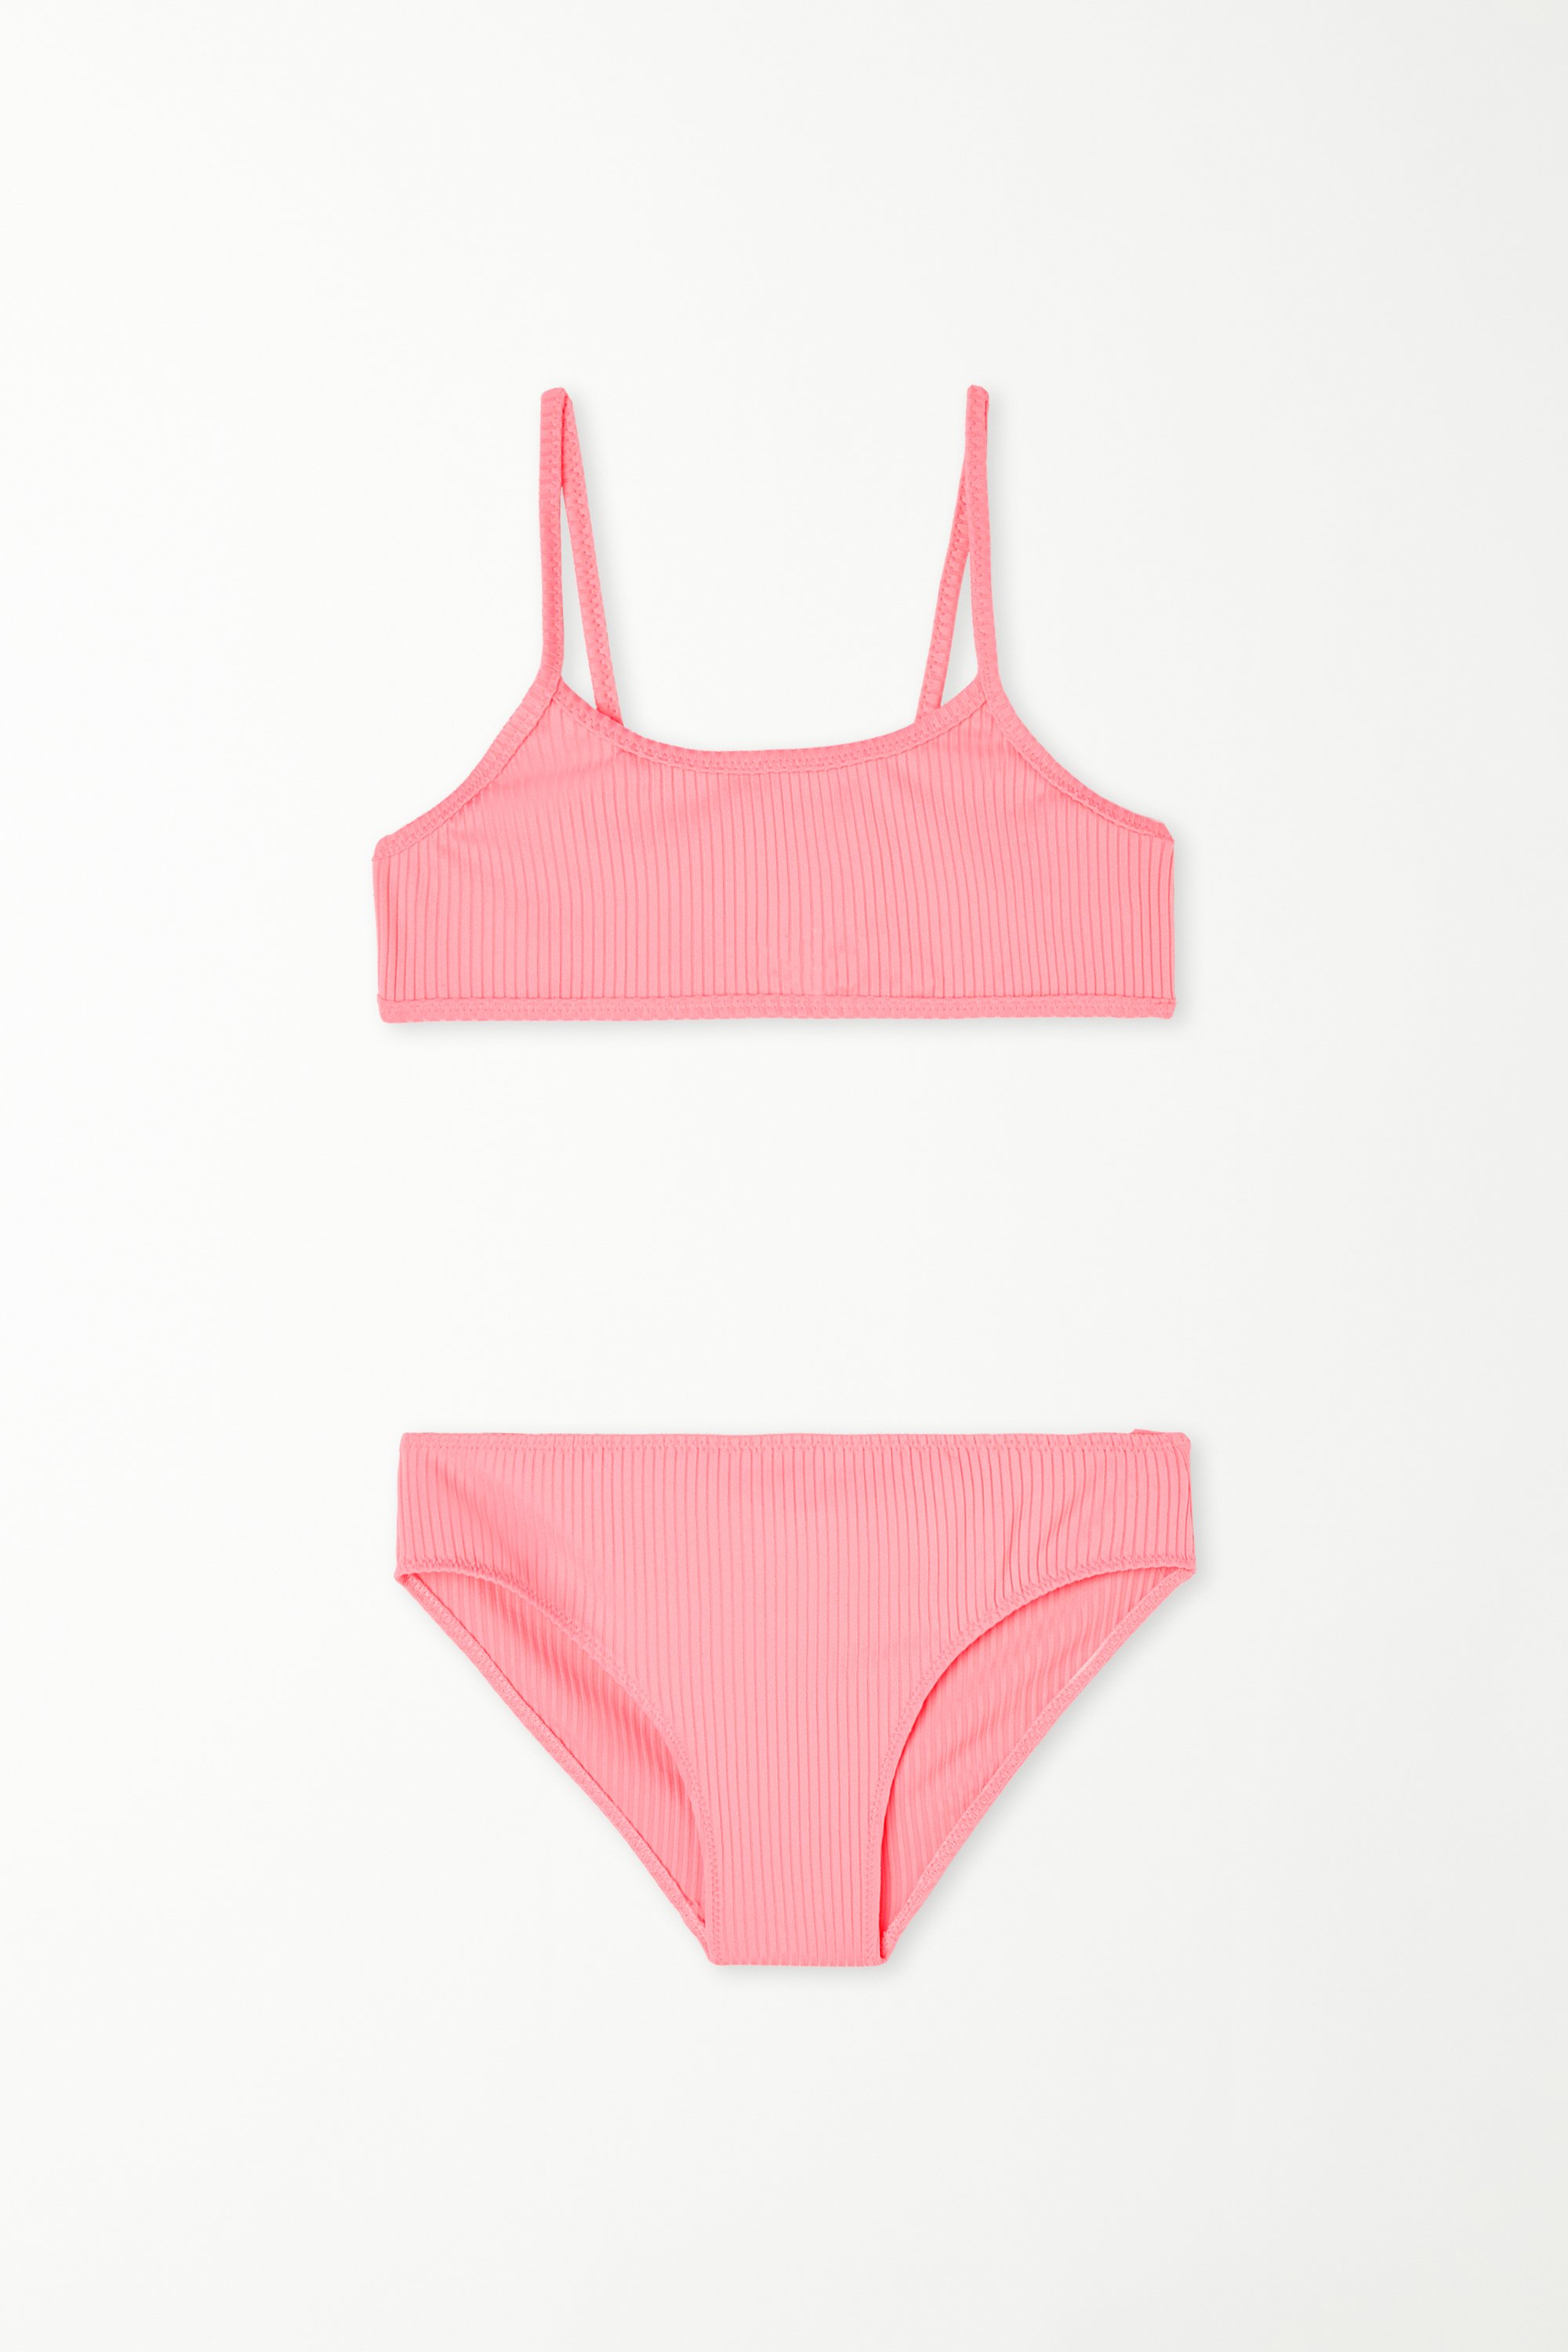 Girls’ Recycled Ribbed Bikini Top and Bottoms